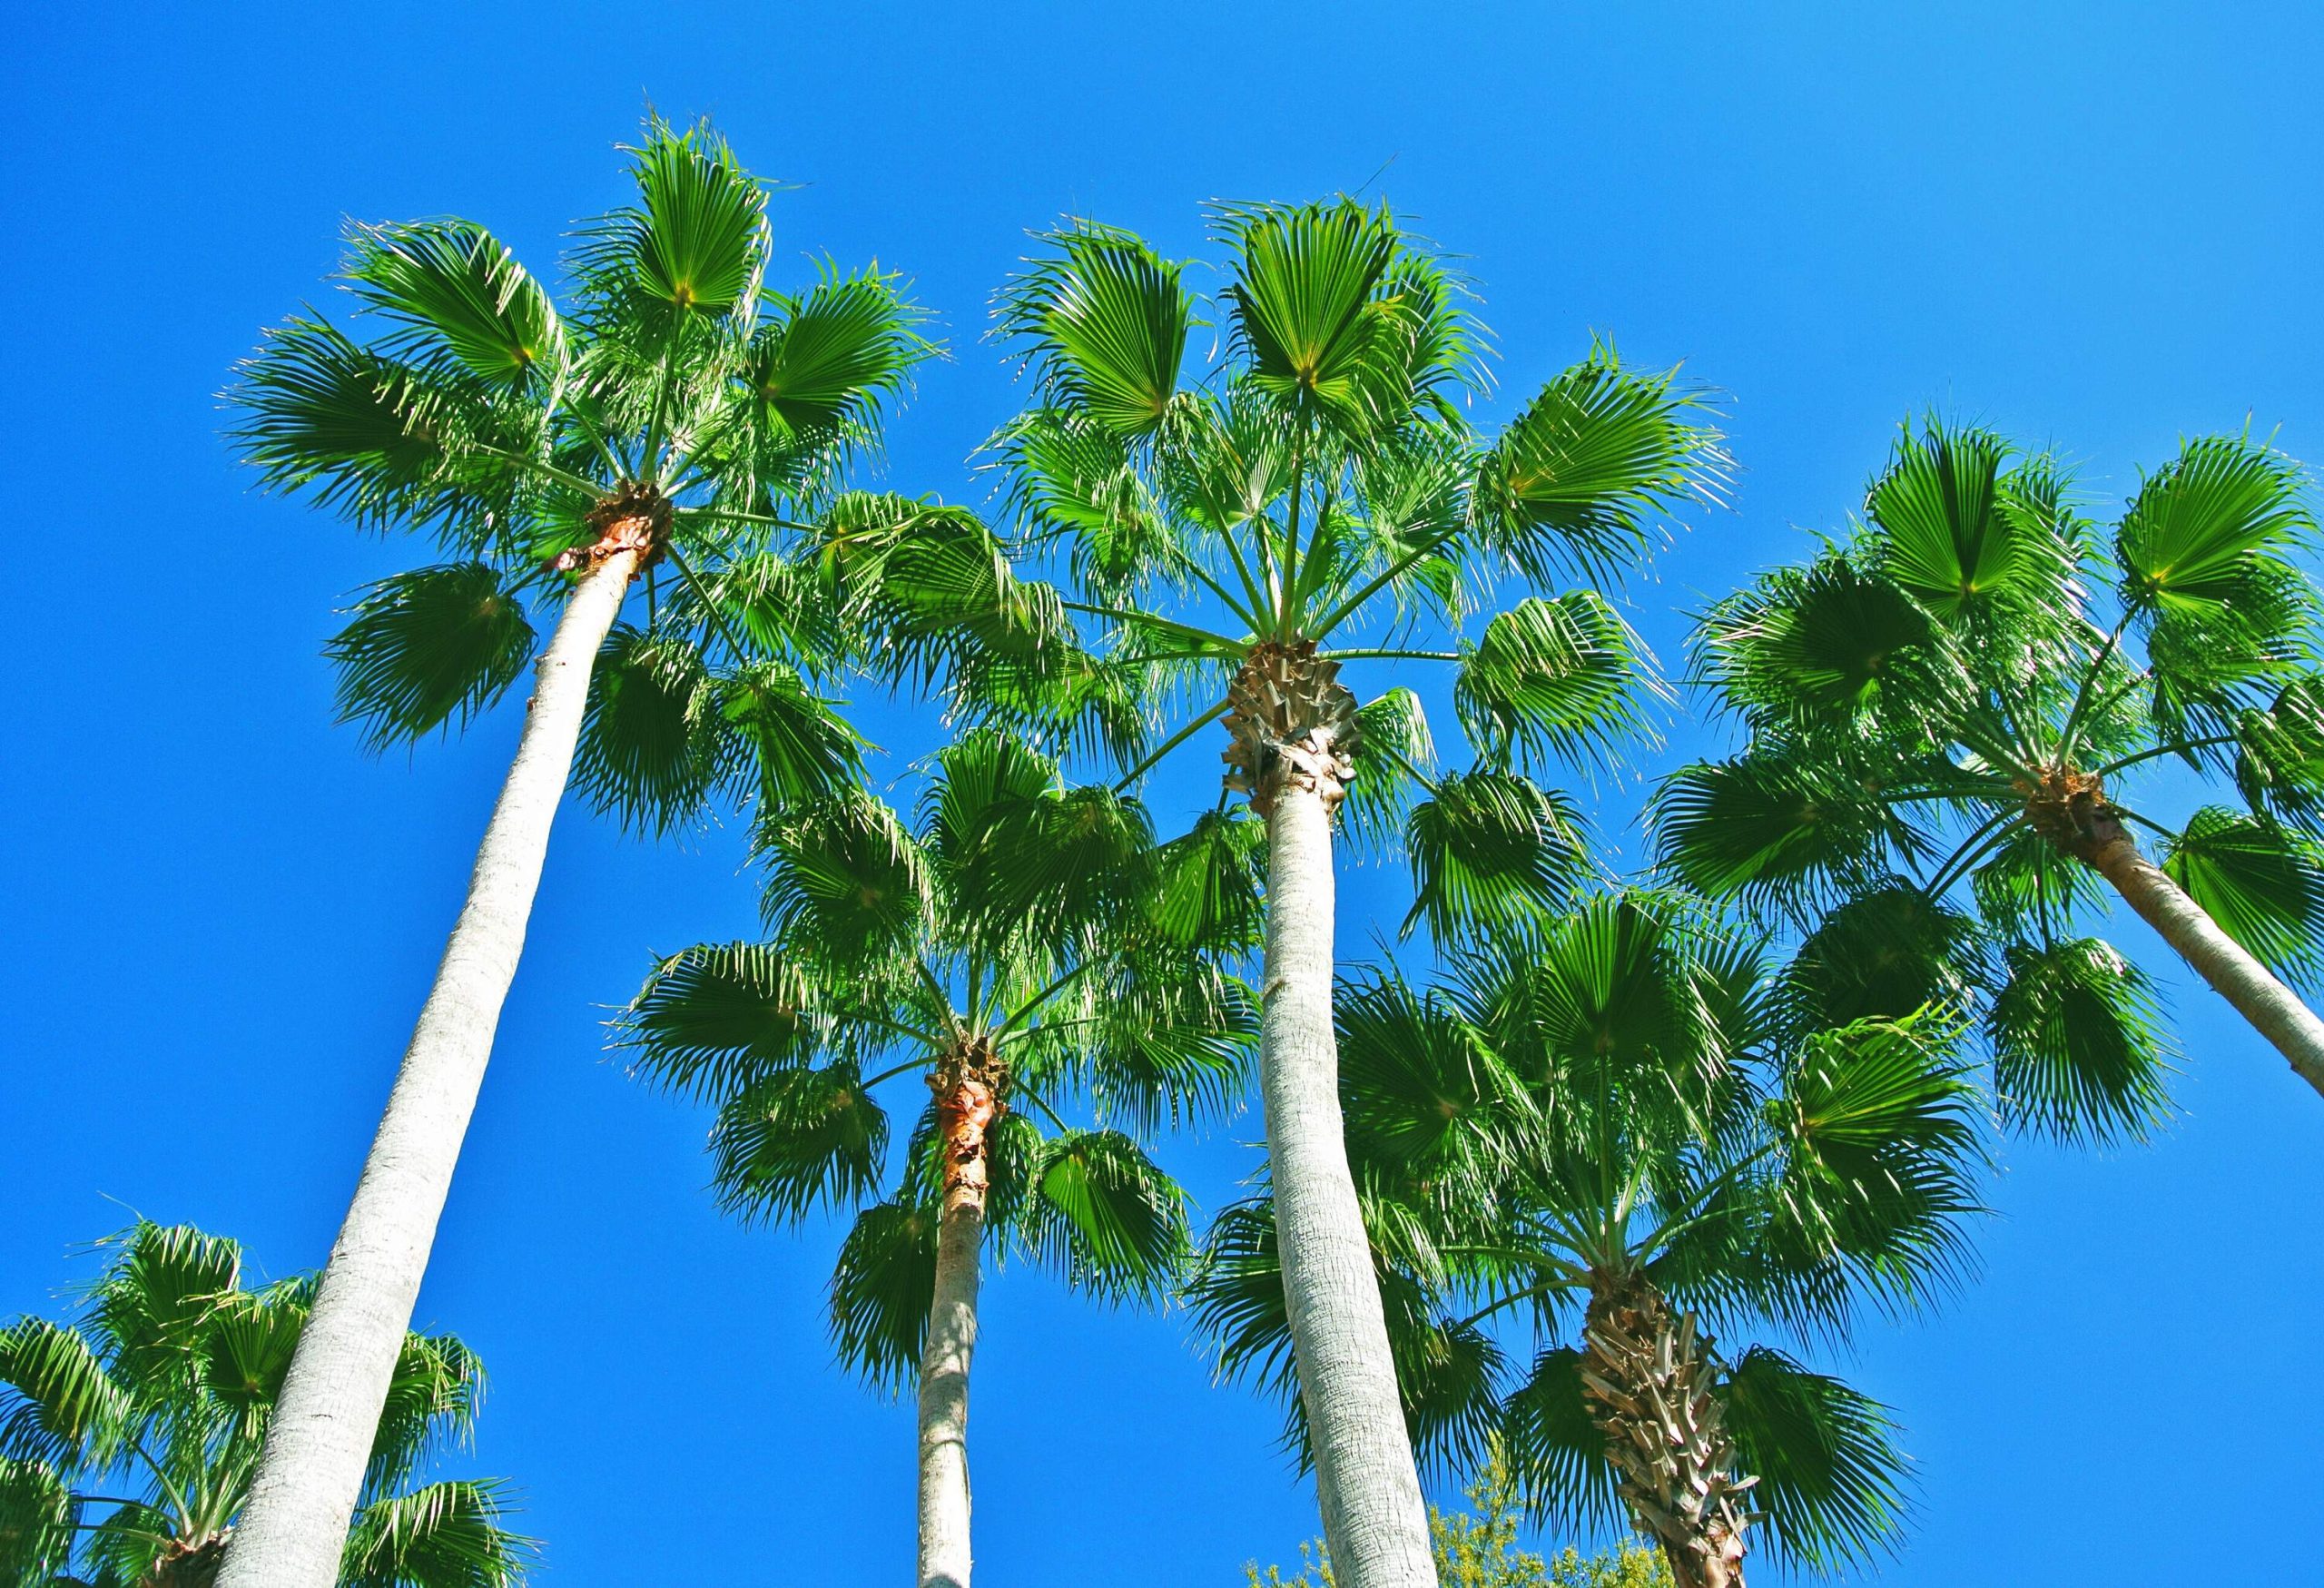 Low angle view of palm trees against a deep blue sky